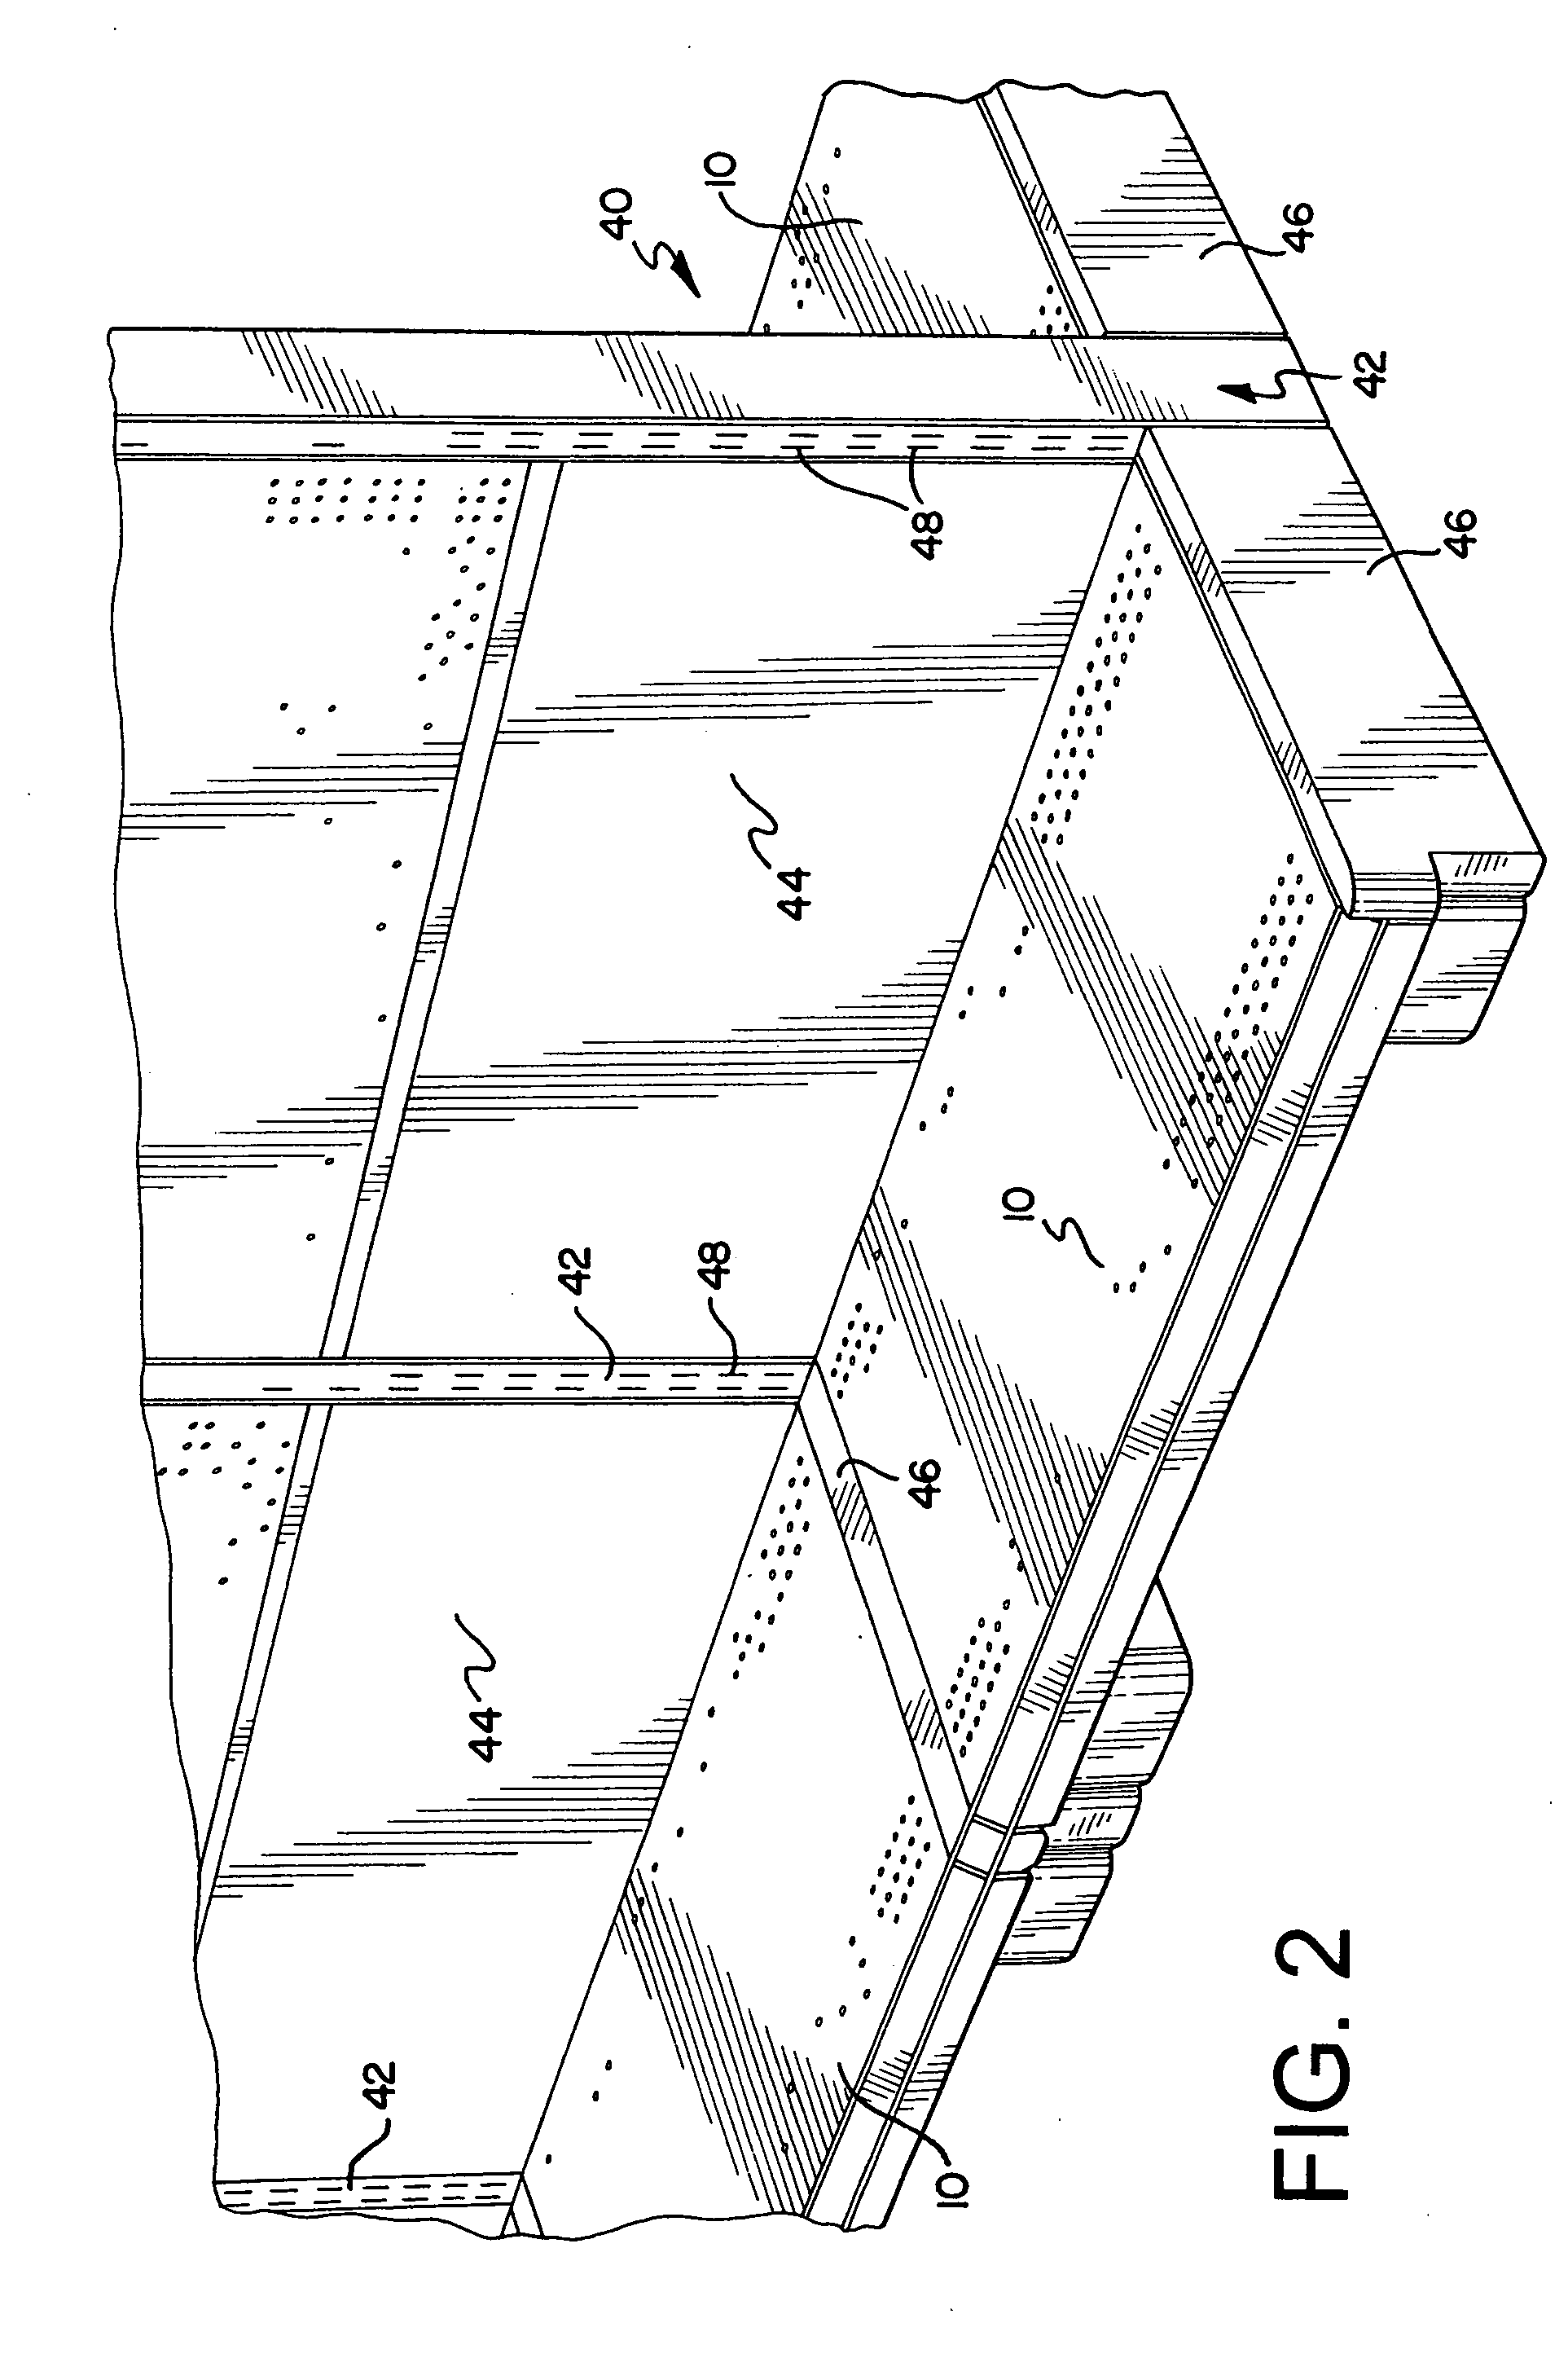 Coupling system for modular base deck and display system